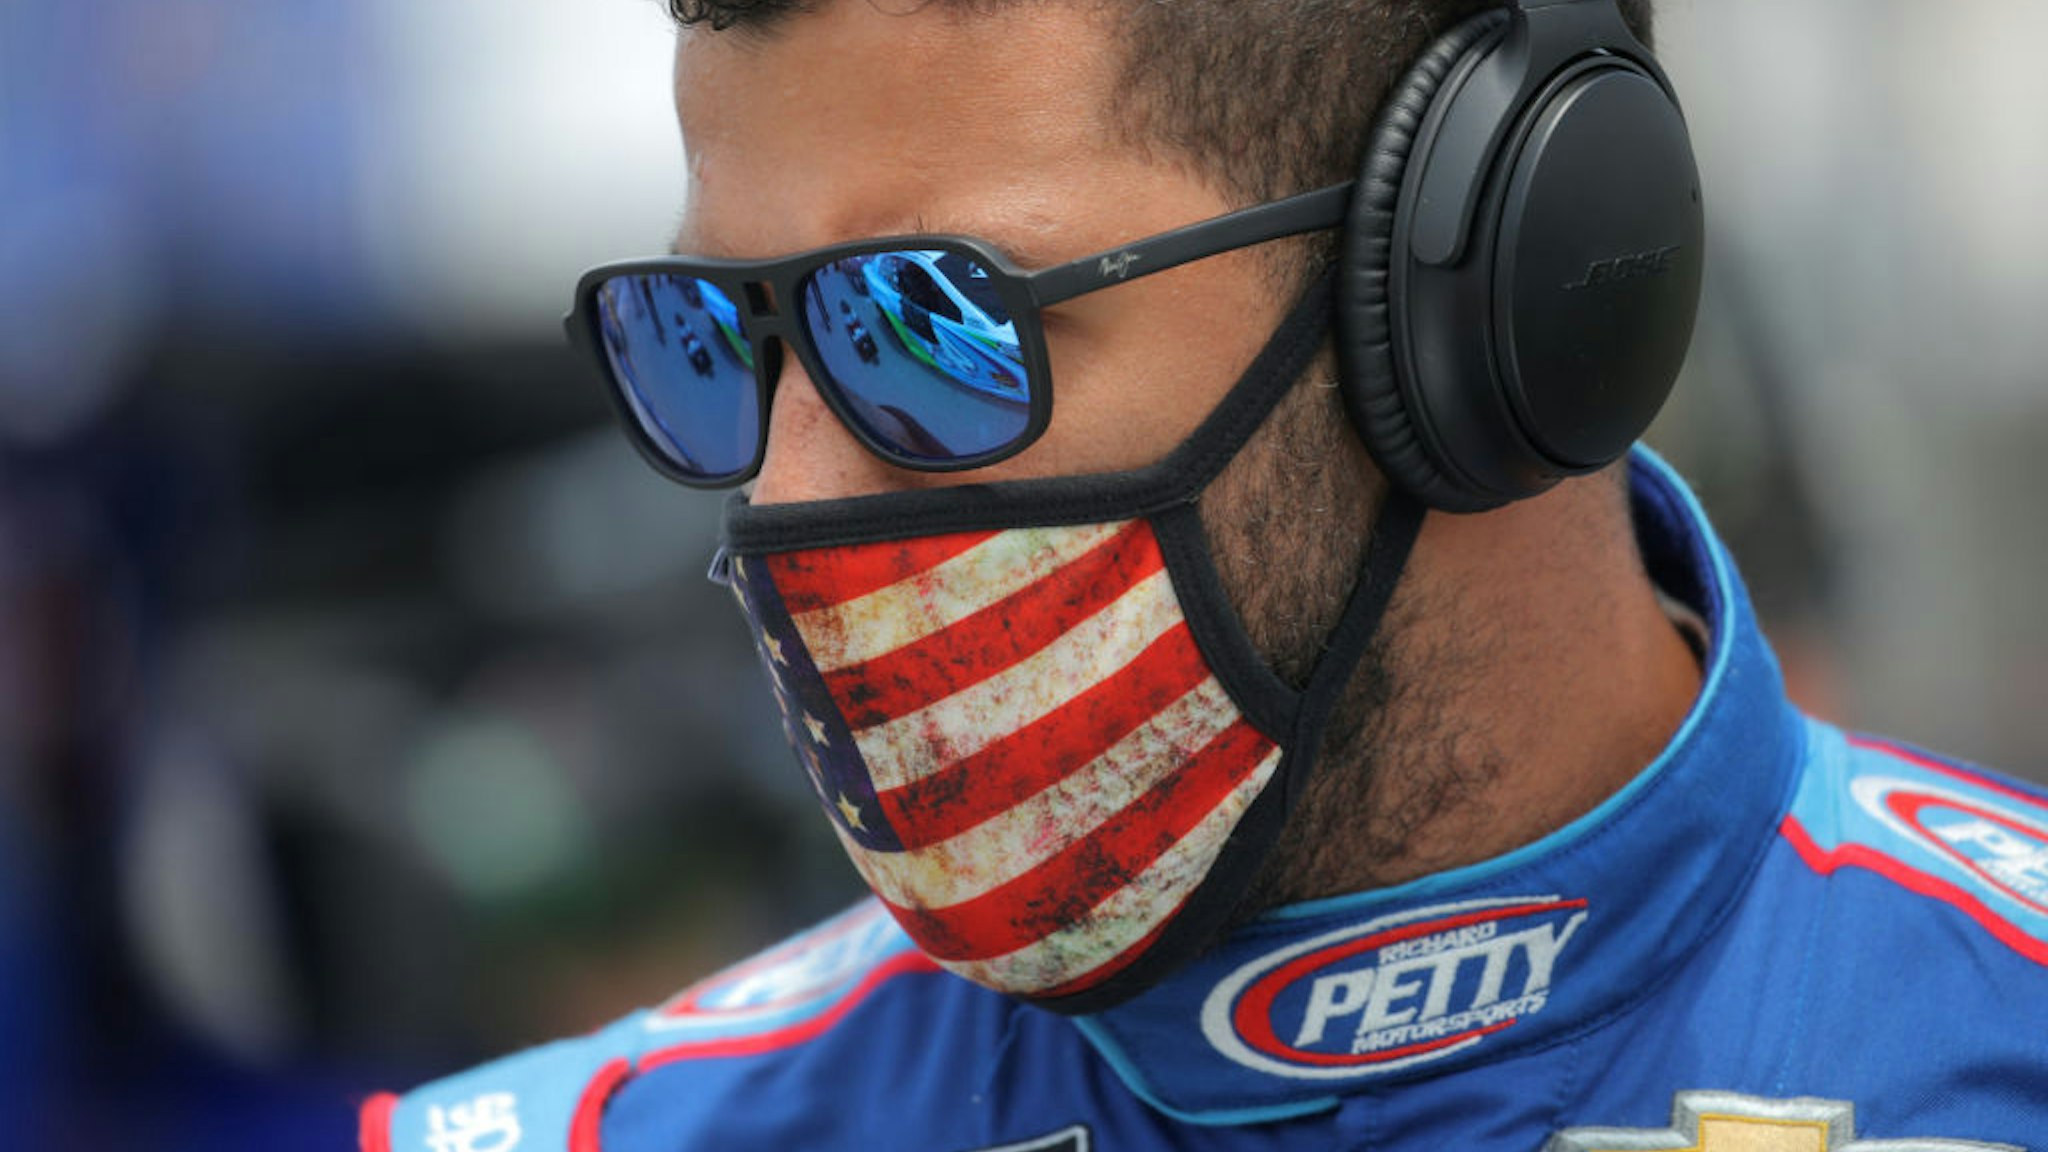 Bubba Wallace, driver of the #43 Victory Junction Chevrolet, stands on the grid prior to the NASCAR Cup Series GEICO 500 at Talladega Superspeedway on June 22, 2020 in Talladega, Alabama.